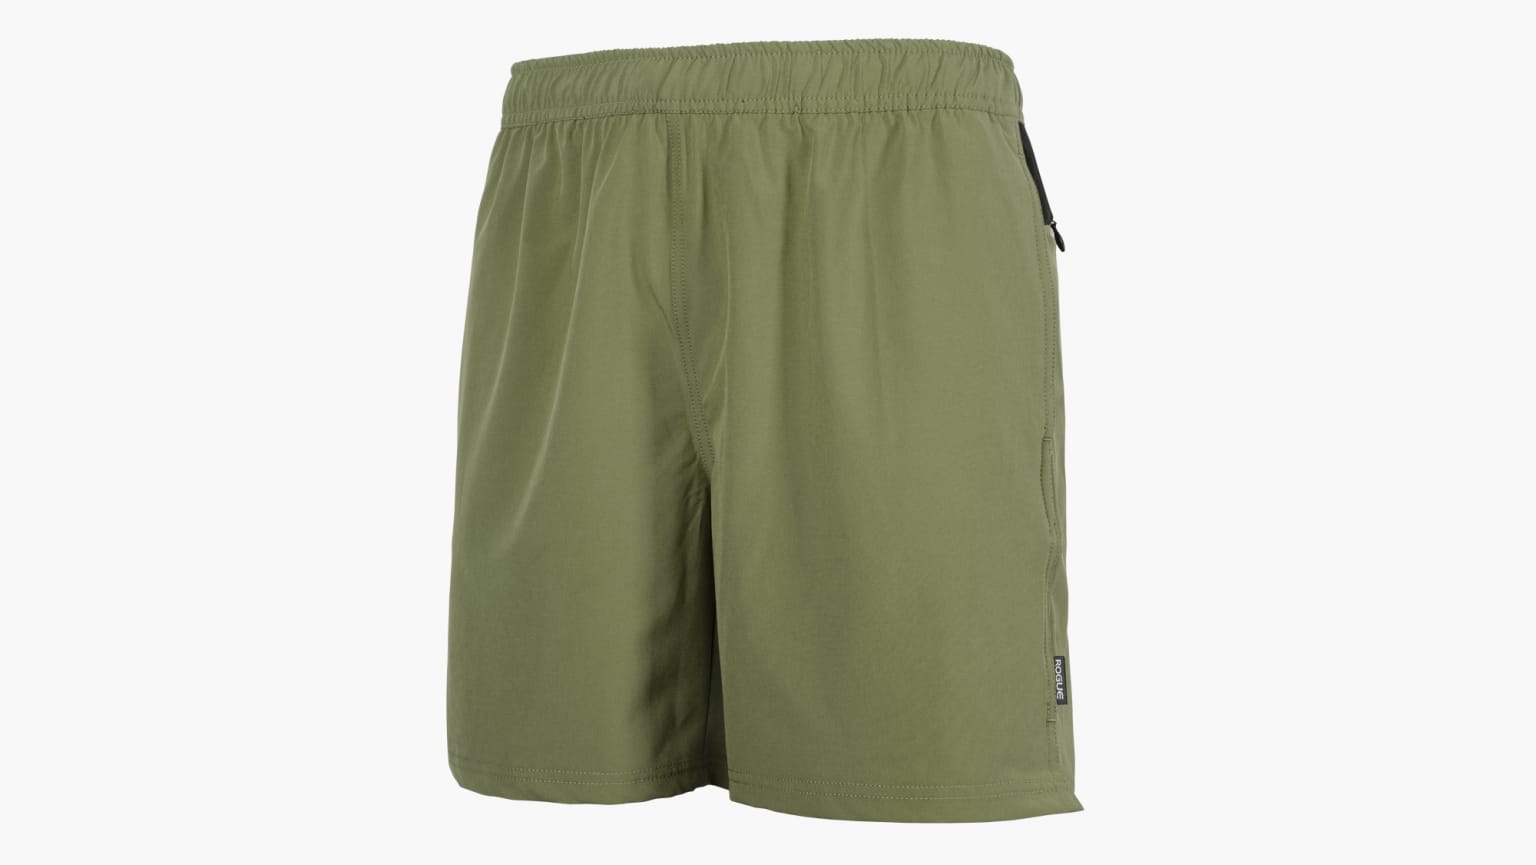 Men's Workout Short  Army Green Shorts for Men